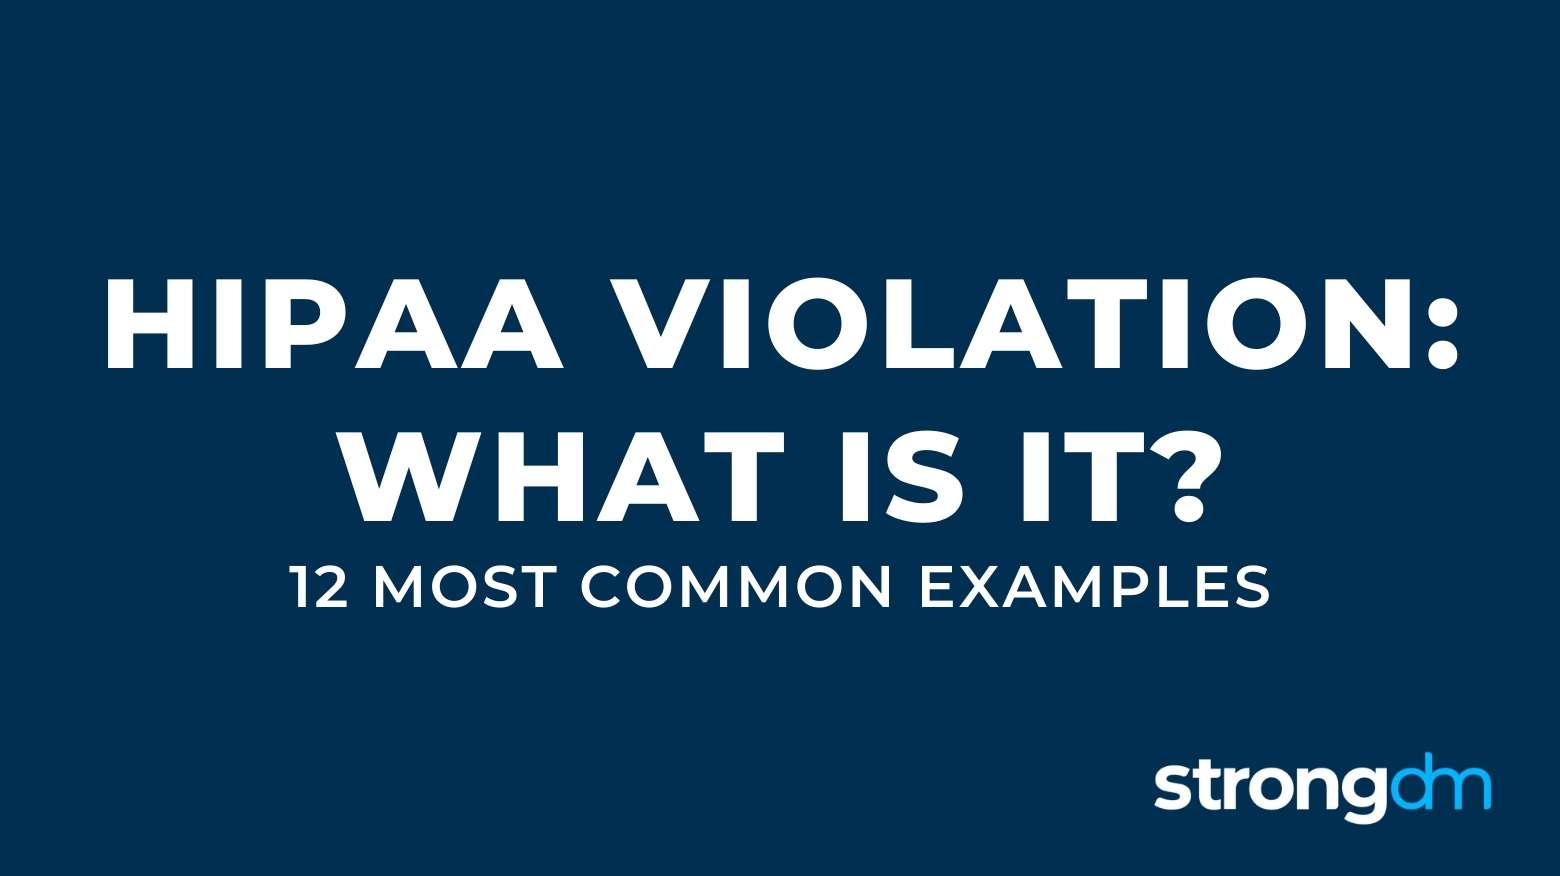 What Is a HIPAA Violation? 12 Most Common Examples